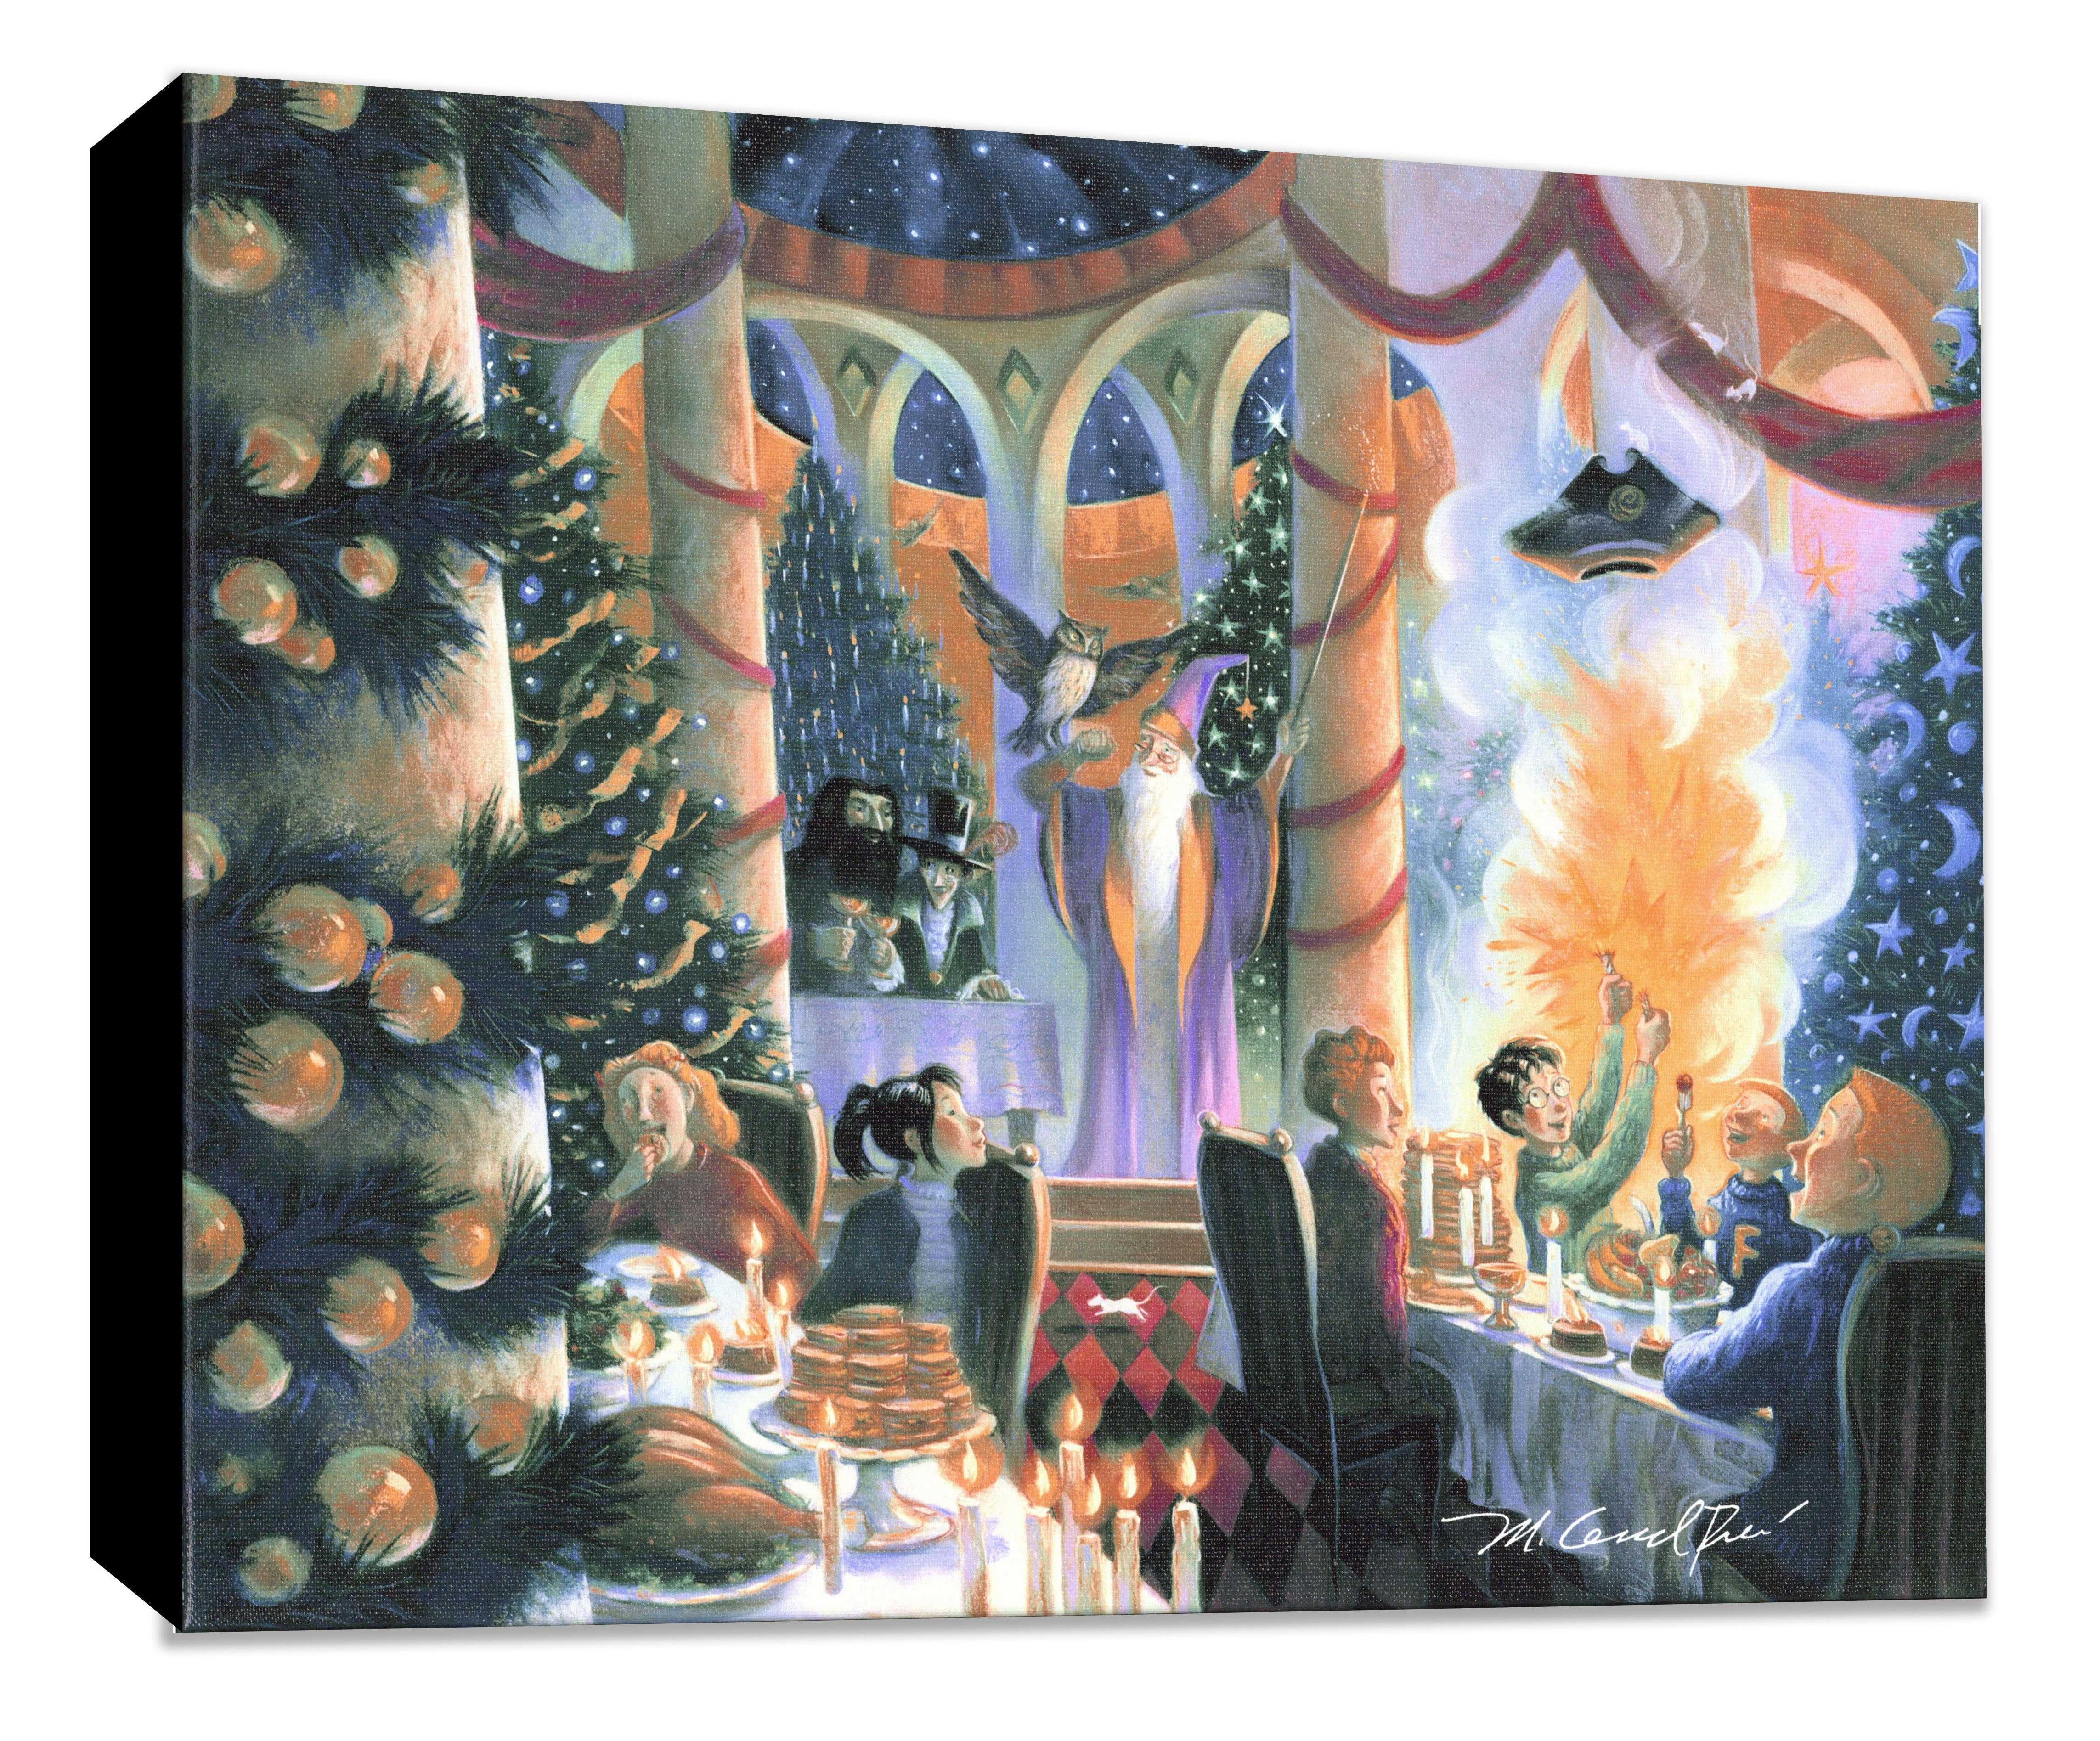 Wall Art Print Harry Potter - All I Want For Christmas, Gifts &  Merchandise